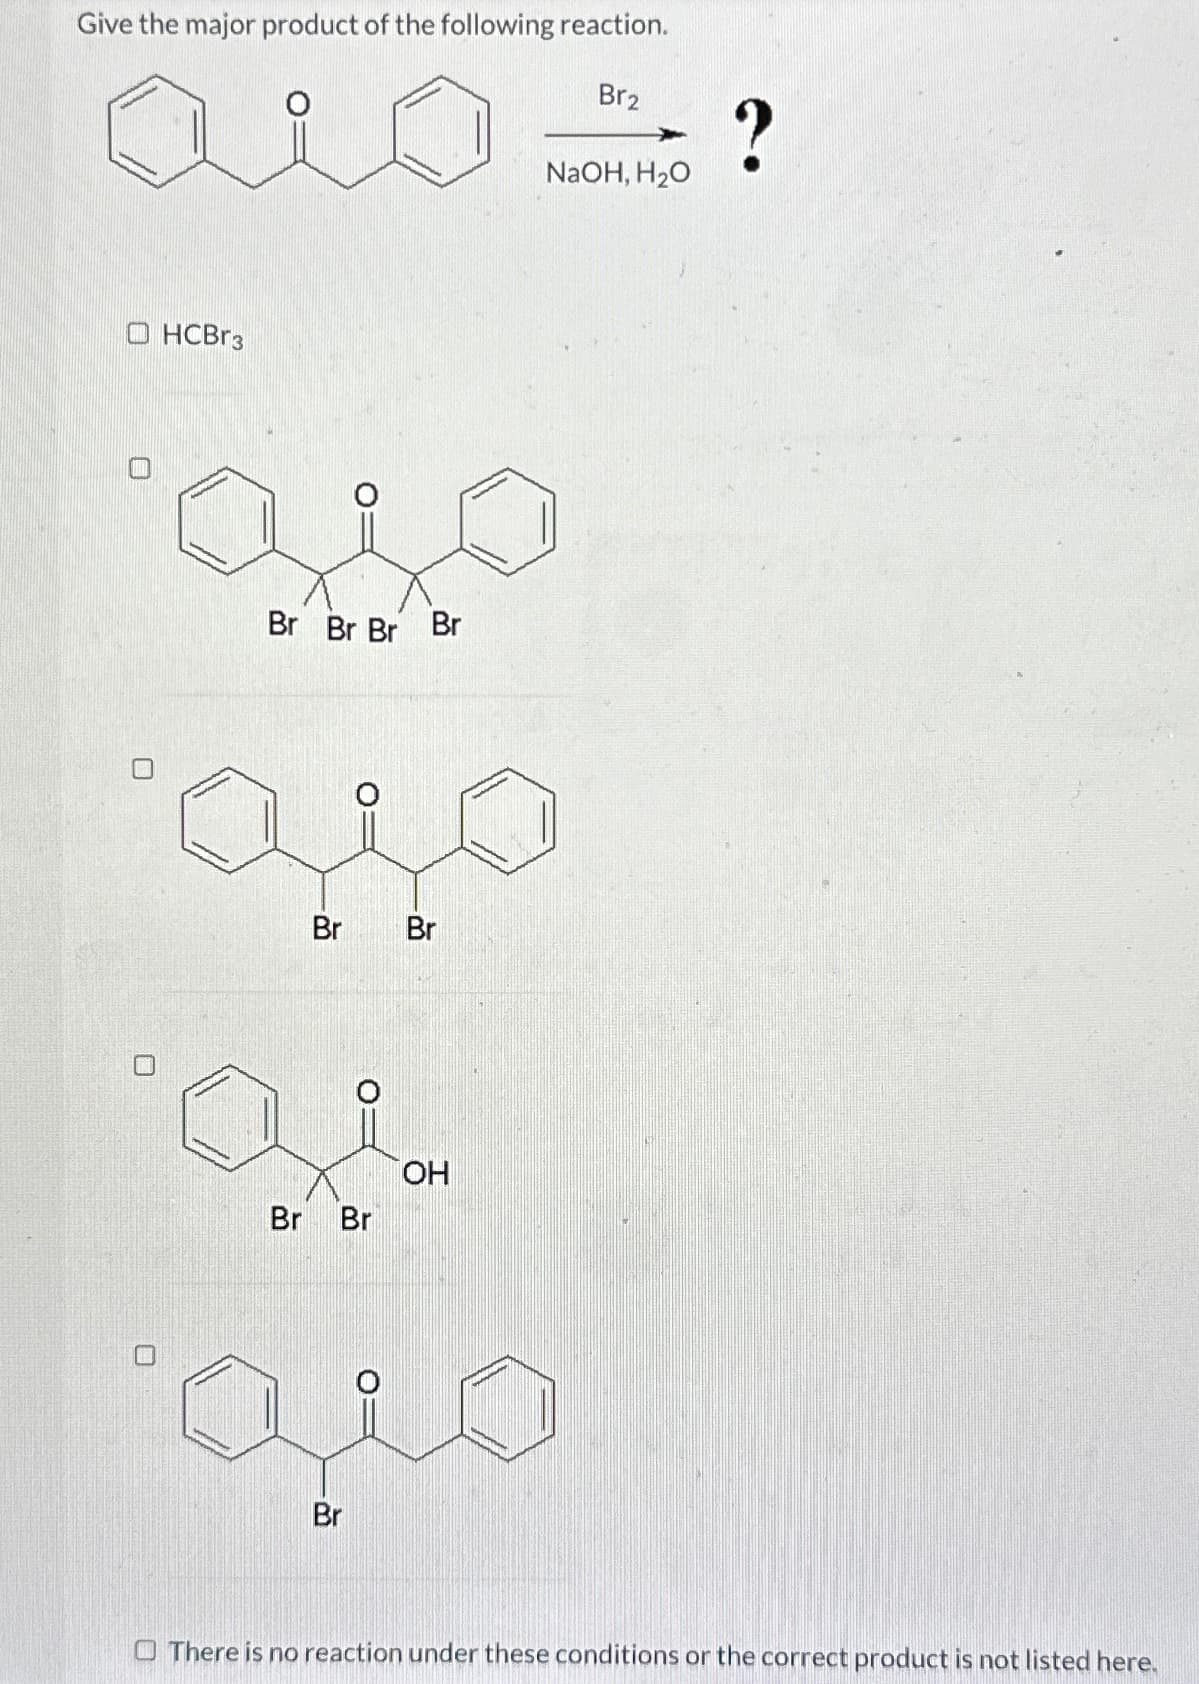 Give the major product of the following reaction.
O HCB3
Br Br Br Br
مية
Br
Br
Br
Br
OH
منه
Br
Br2
?
NaOH, H₂O
There is no reaction under these conditions or the correct product is not listed here.